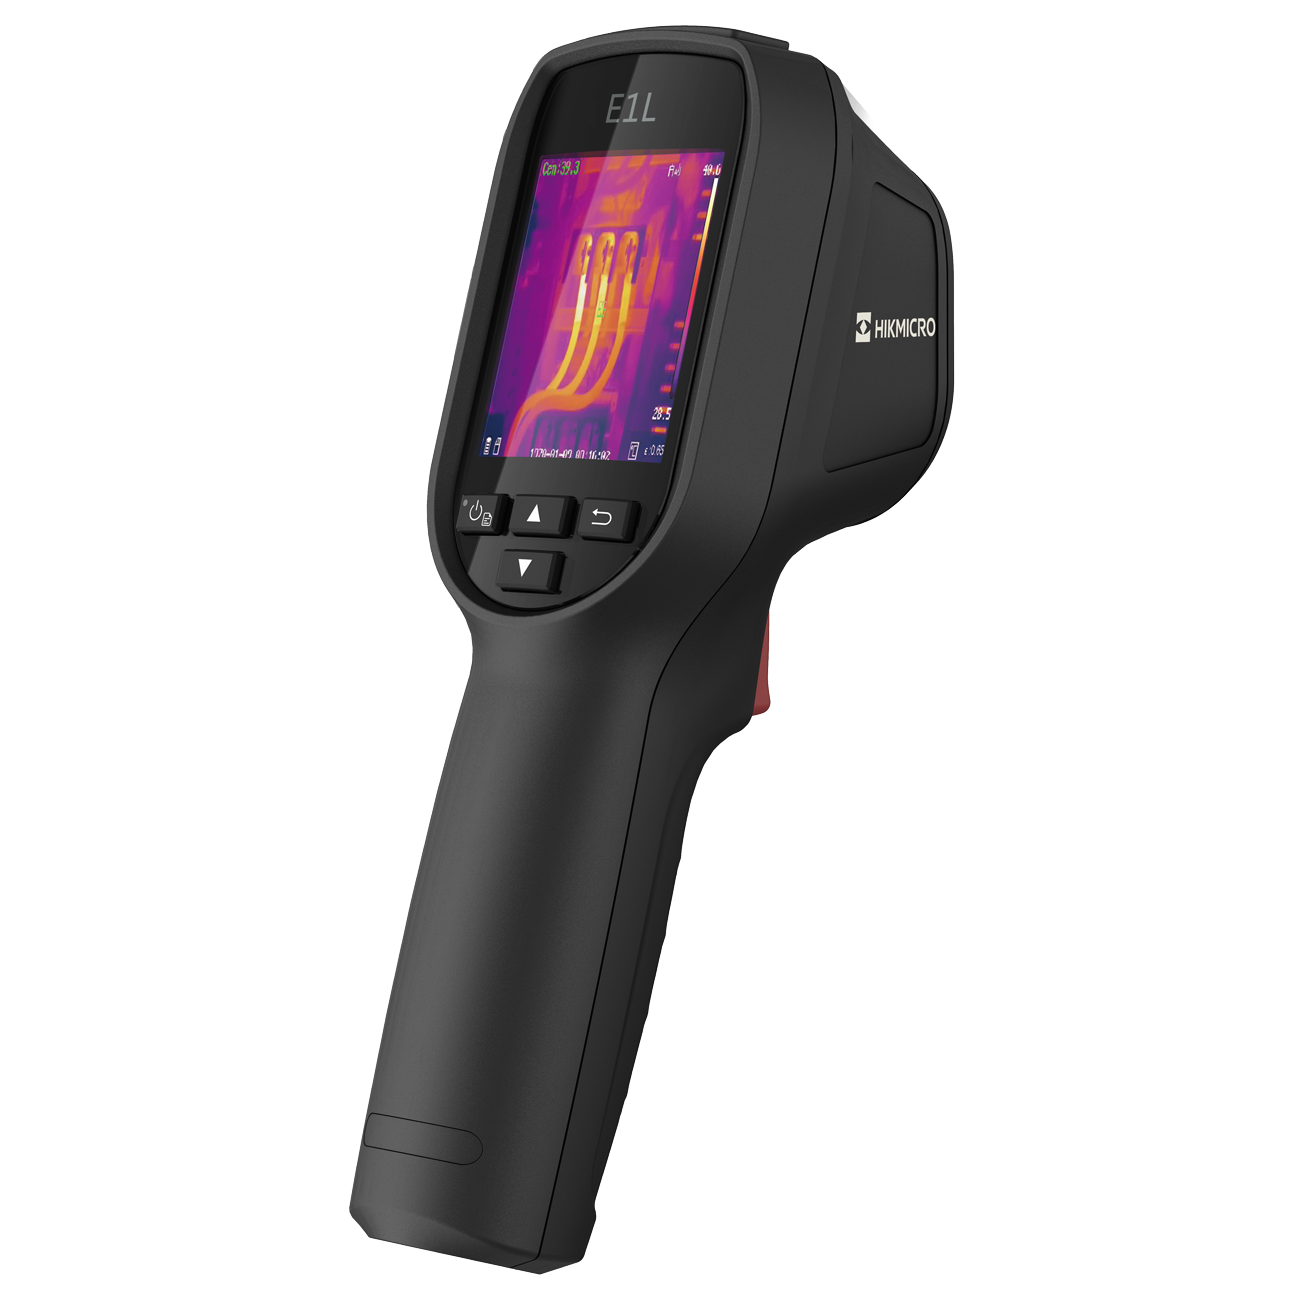 E1L Handheld Thermography Camera